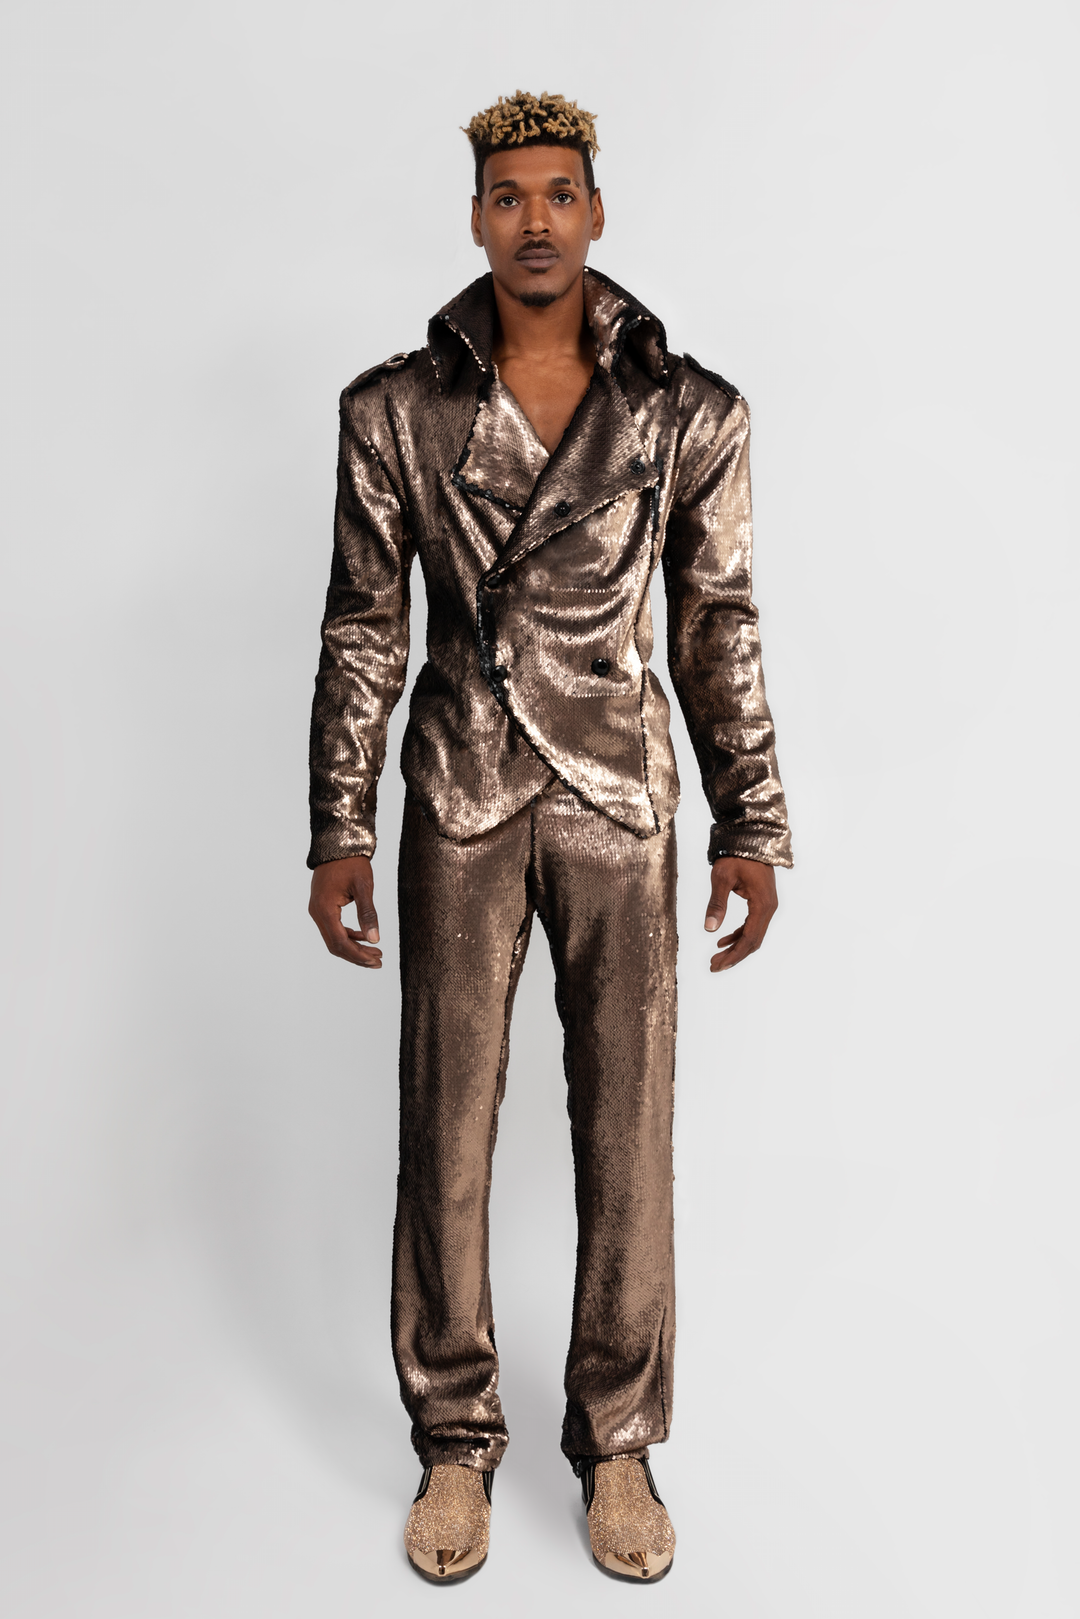 STRAIGHT LEG "ROCK N' ROLL" SUIT - MENS OCCASION